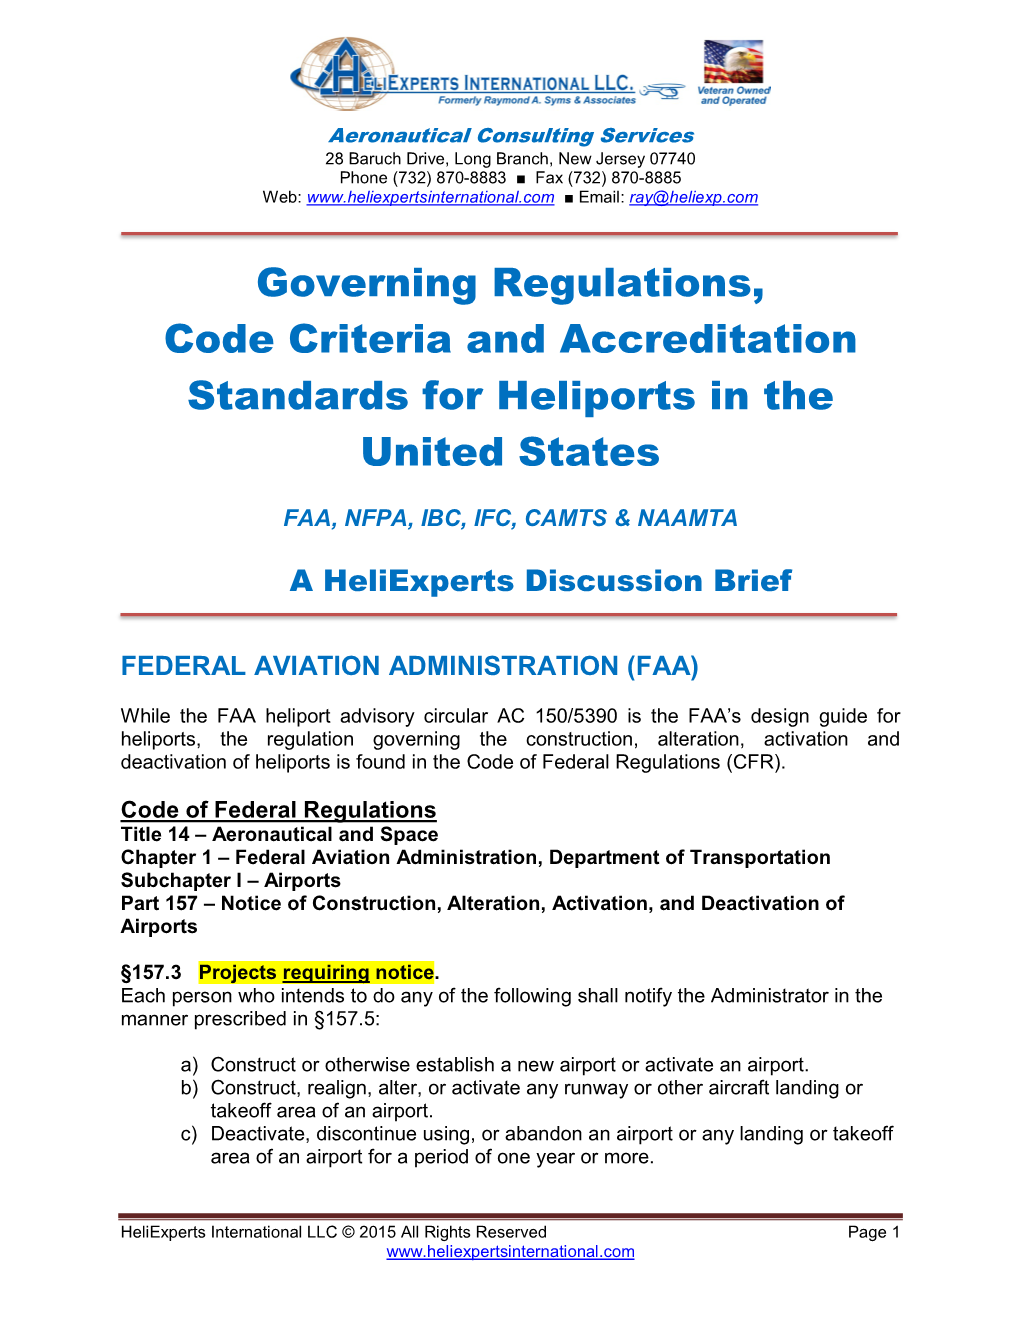 Governing Regulations, Code Criteria and Accreditation Standards for Heliports in the United States